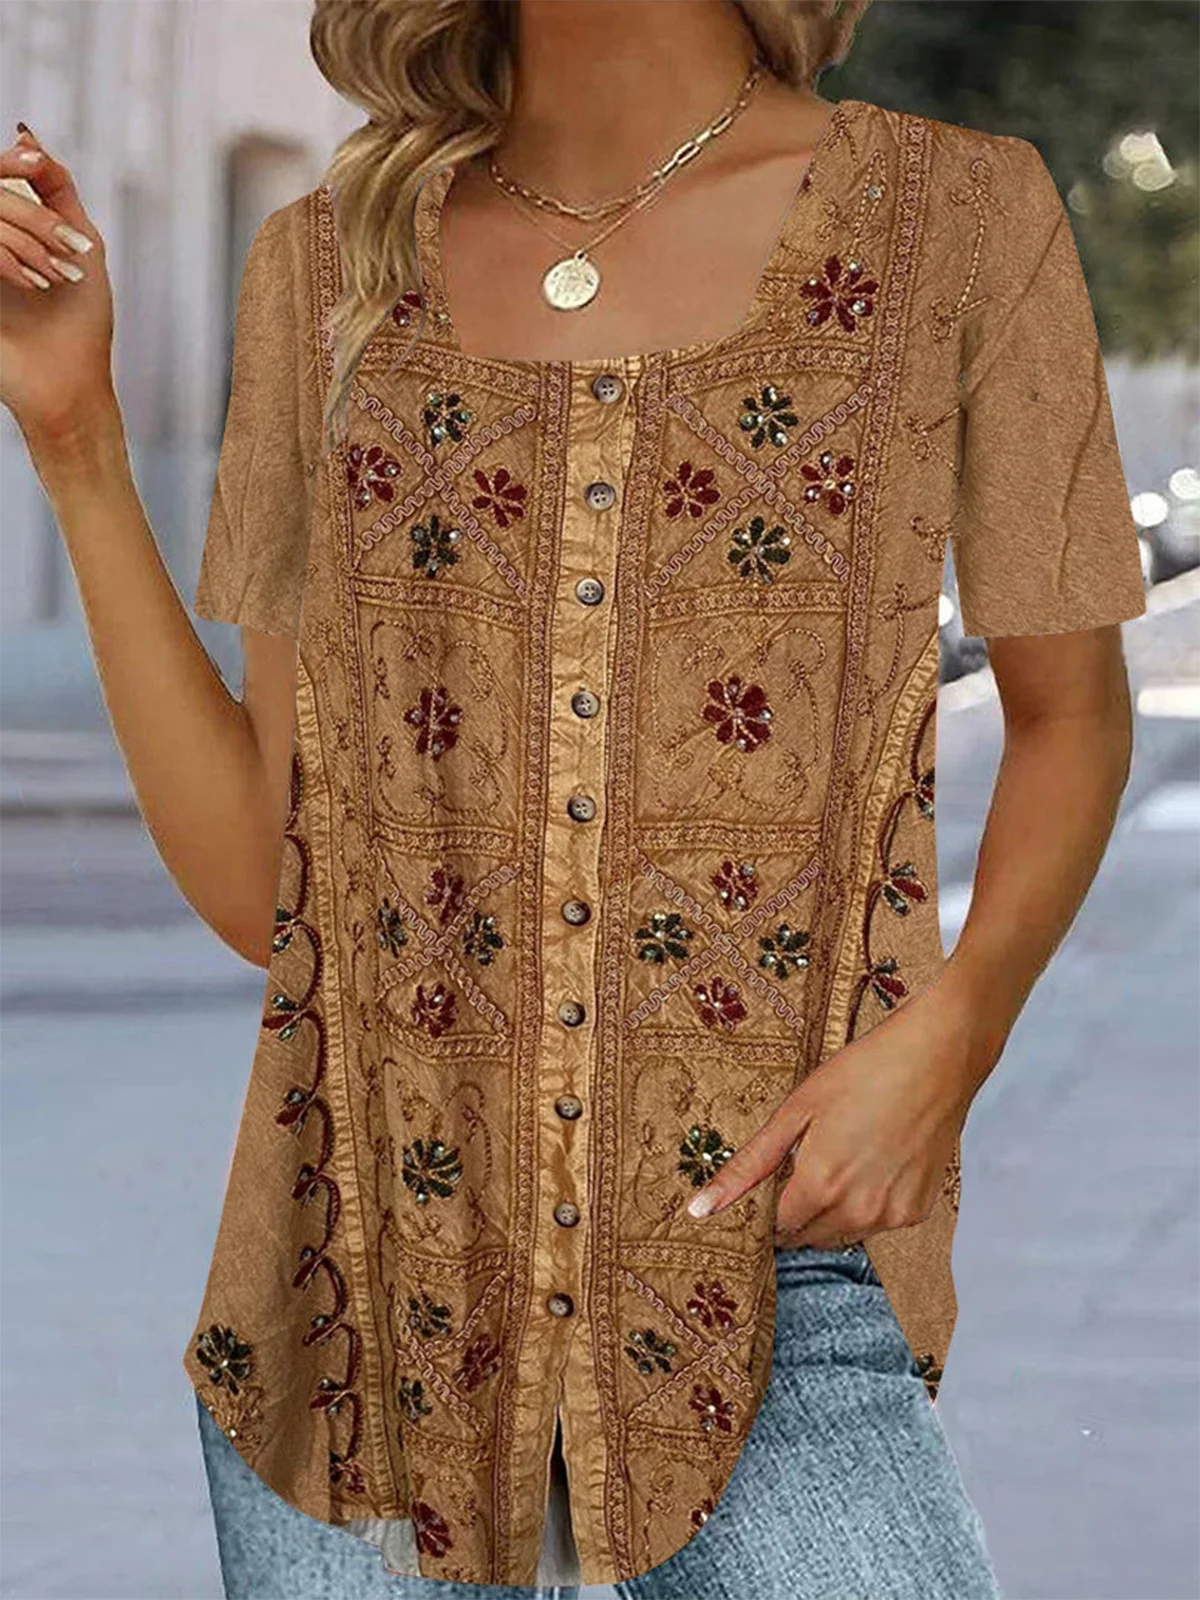 Women's Ethnic T-shirt Square Neck Casual Summer Shirt Brown